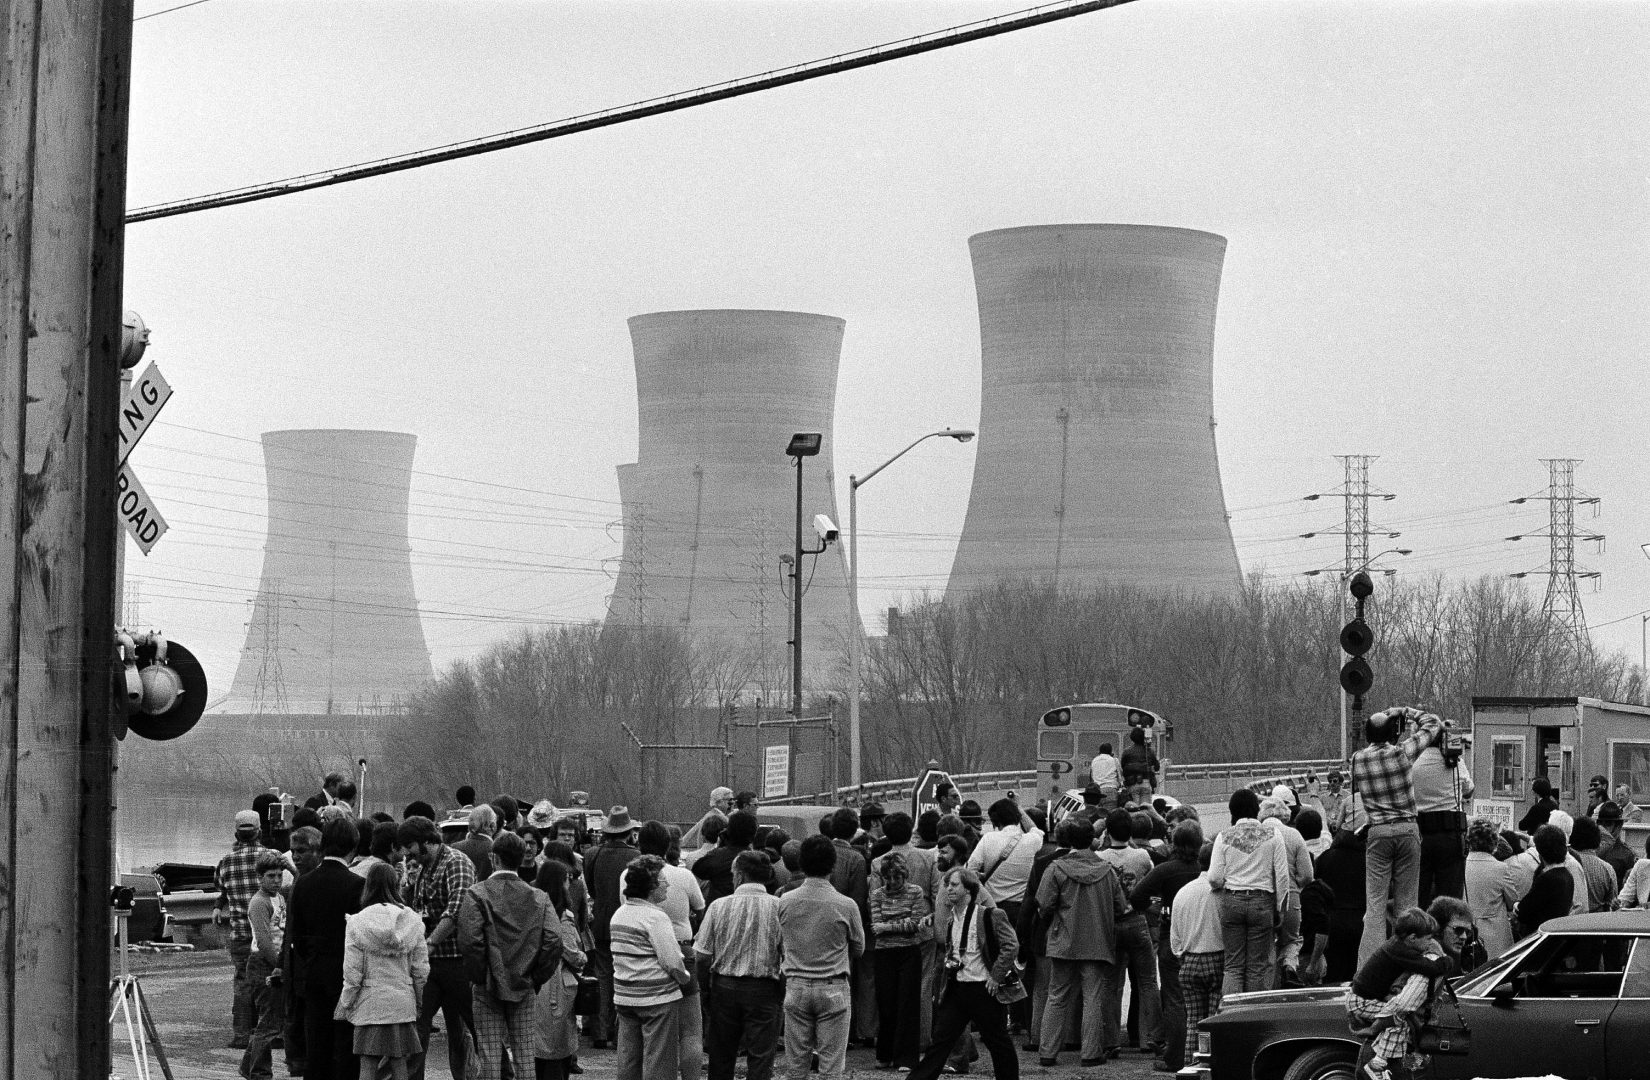 FILE PHOTO: Newsmen and spectators stand in front of the main gate of the Three Mile Island Nuclear Generating Station in Middletown, Penn., April 2, 1979.